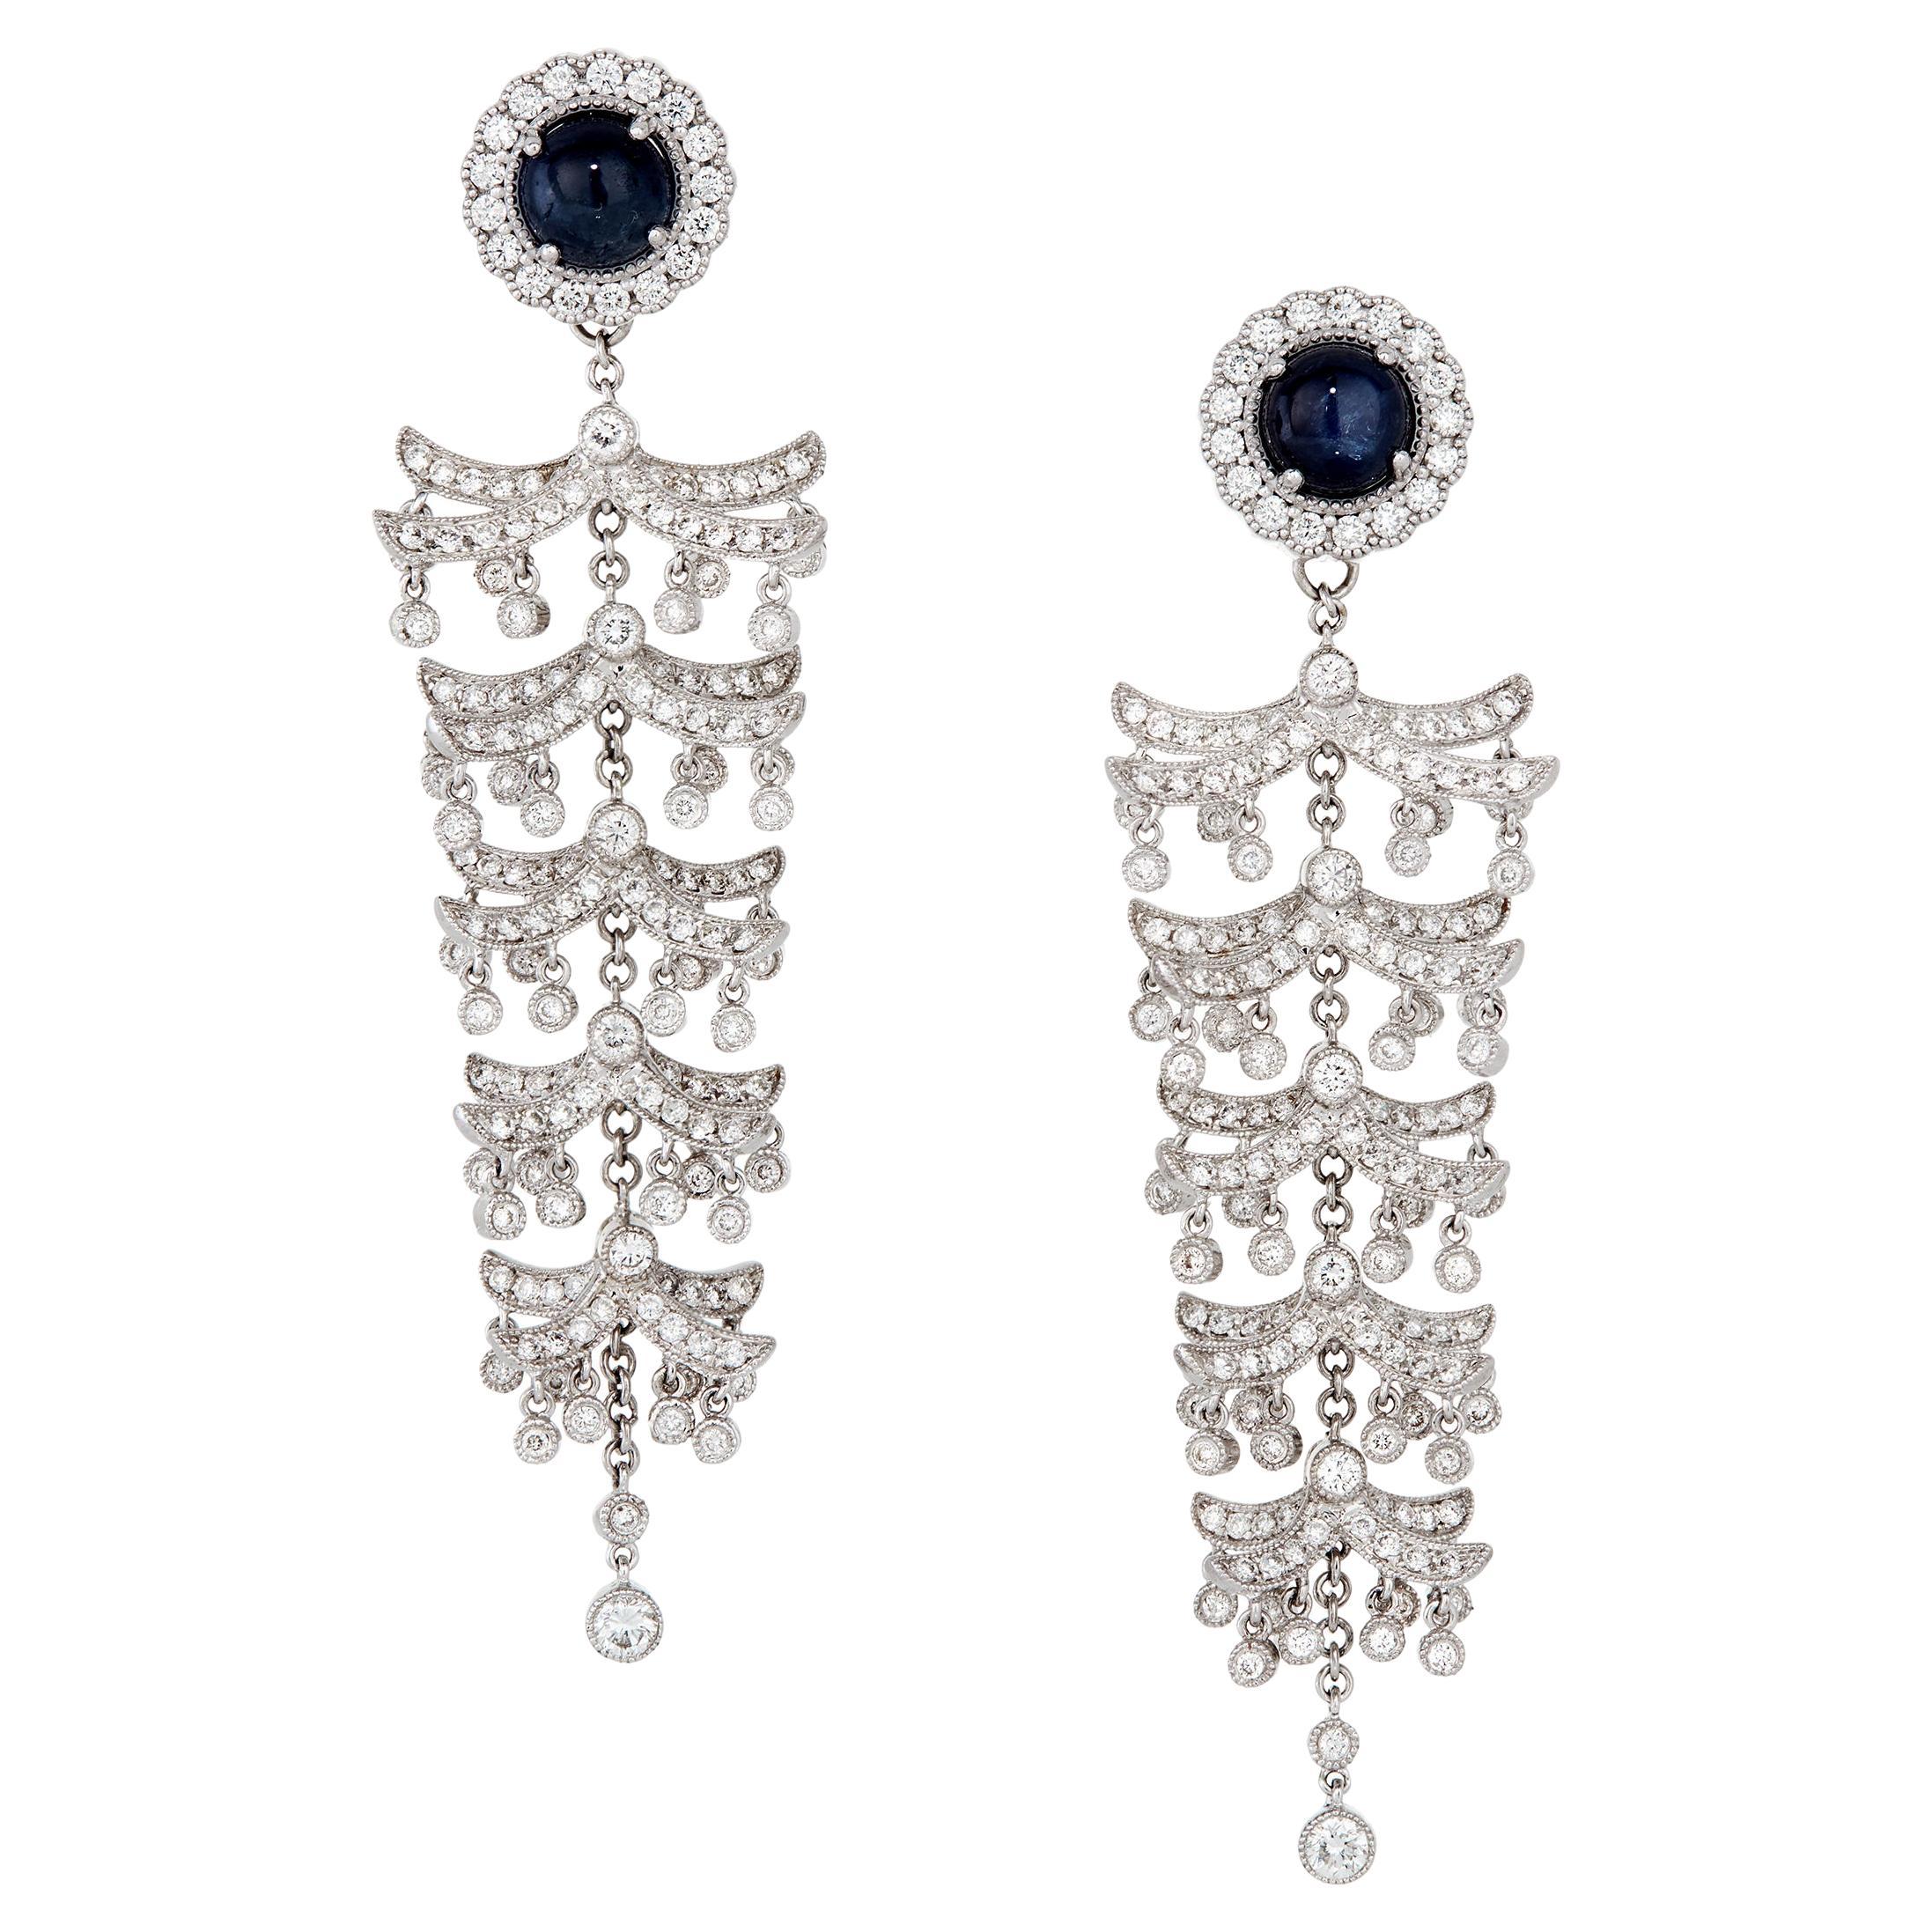 2.64 Carats Sapphire & 2.0 Carats Diamond Pagoda Earrings in 18 Karat White Gold For Sale